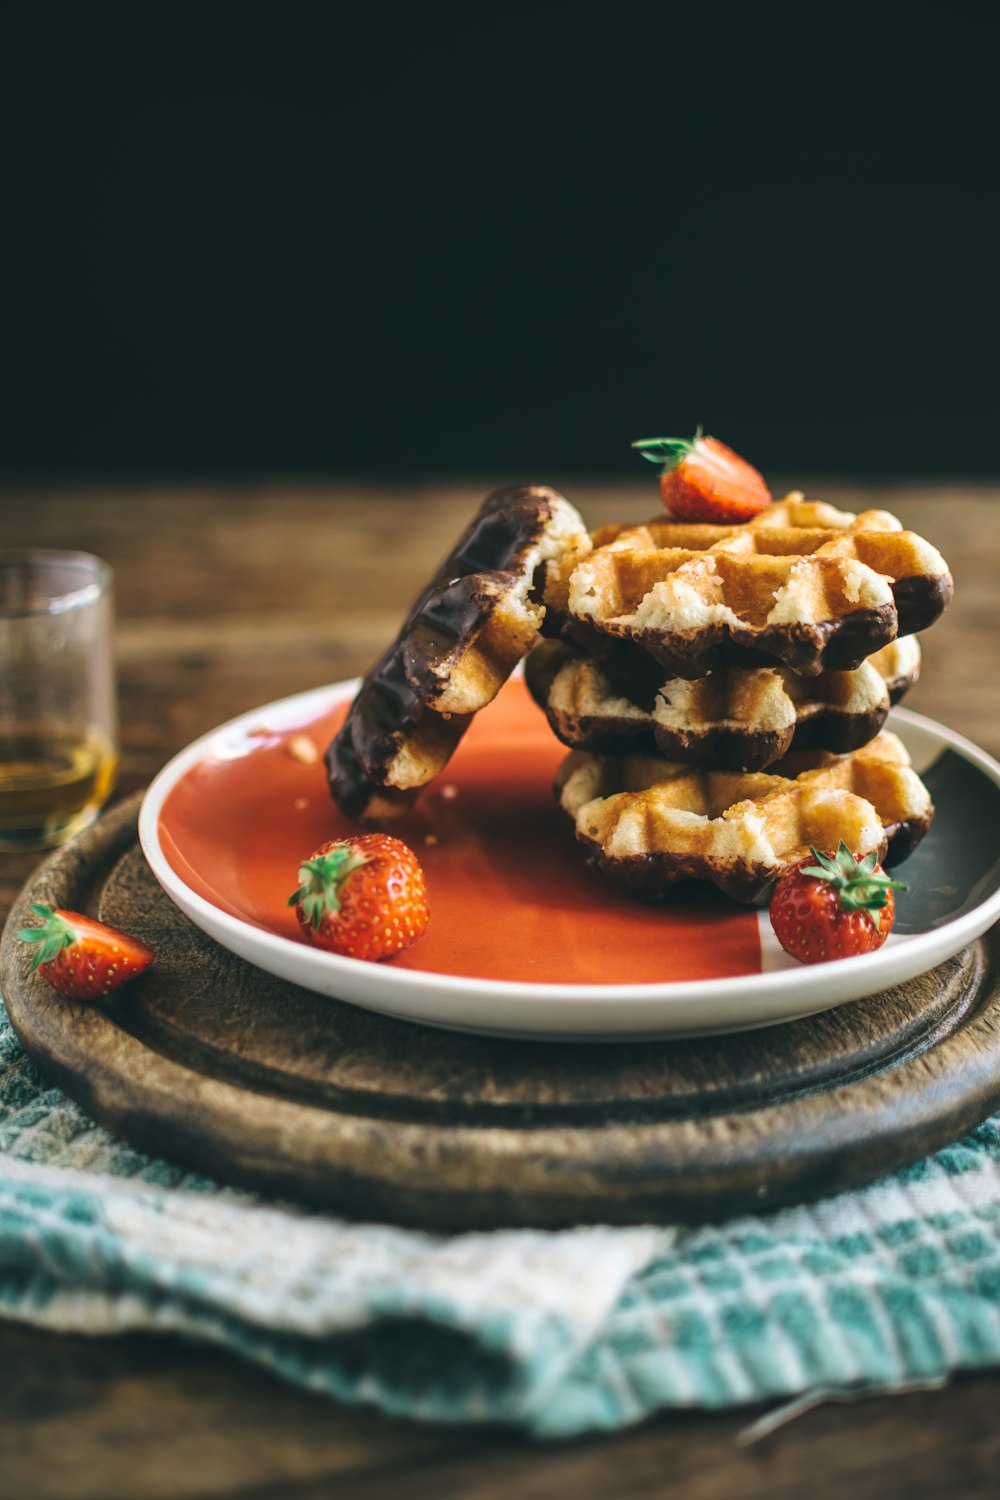 serving of waffle with strawberries